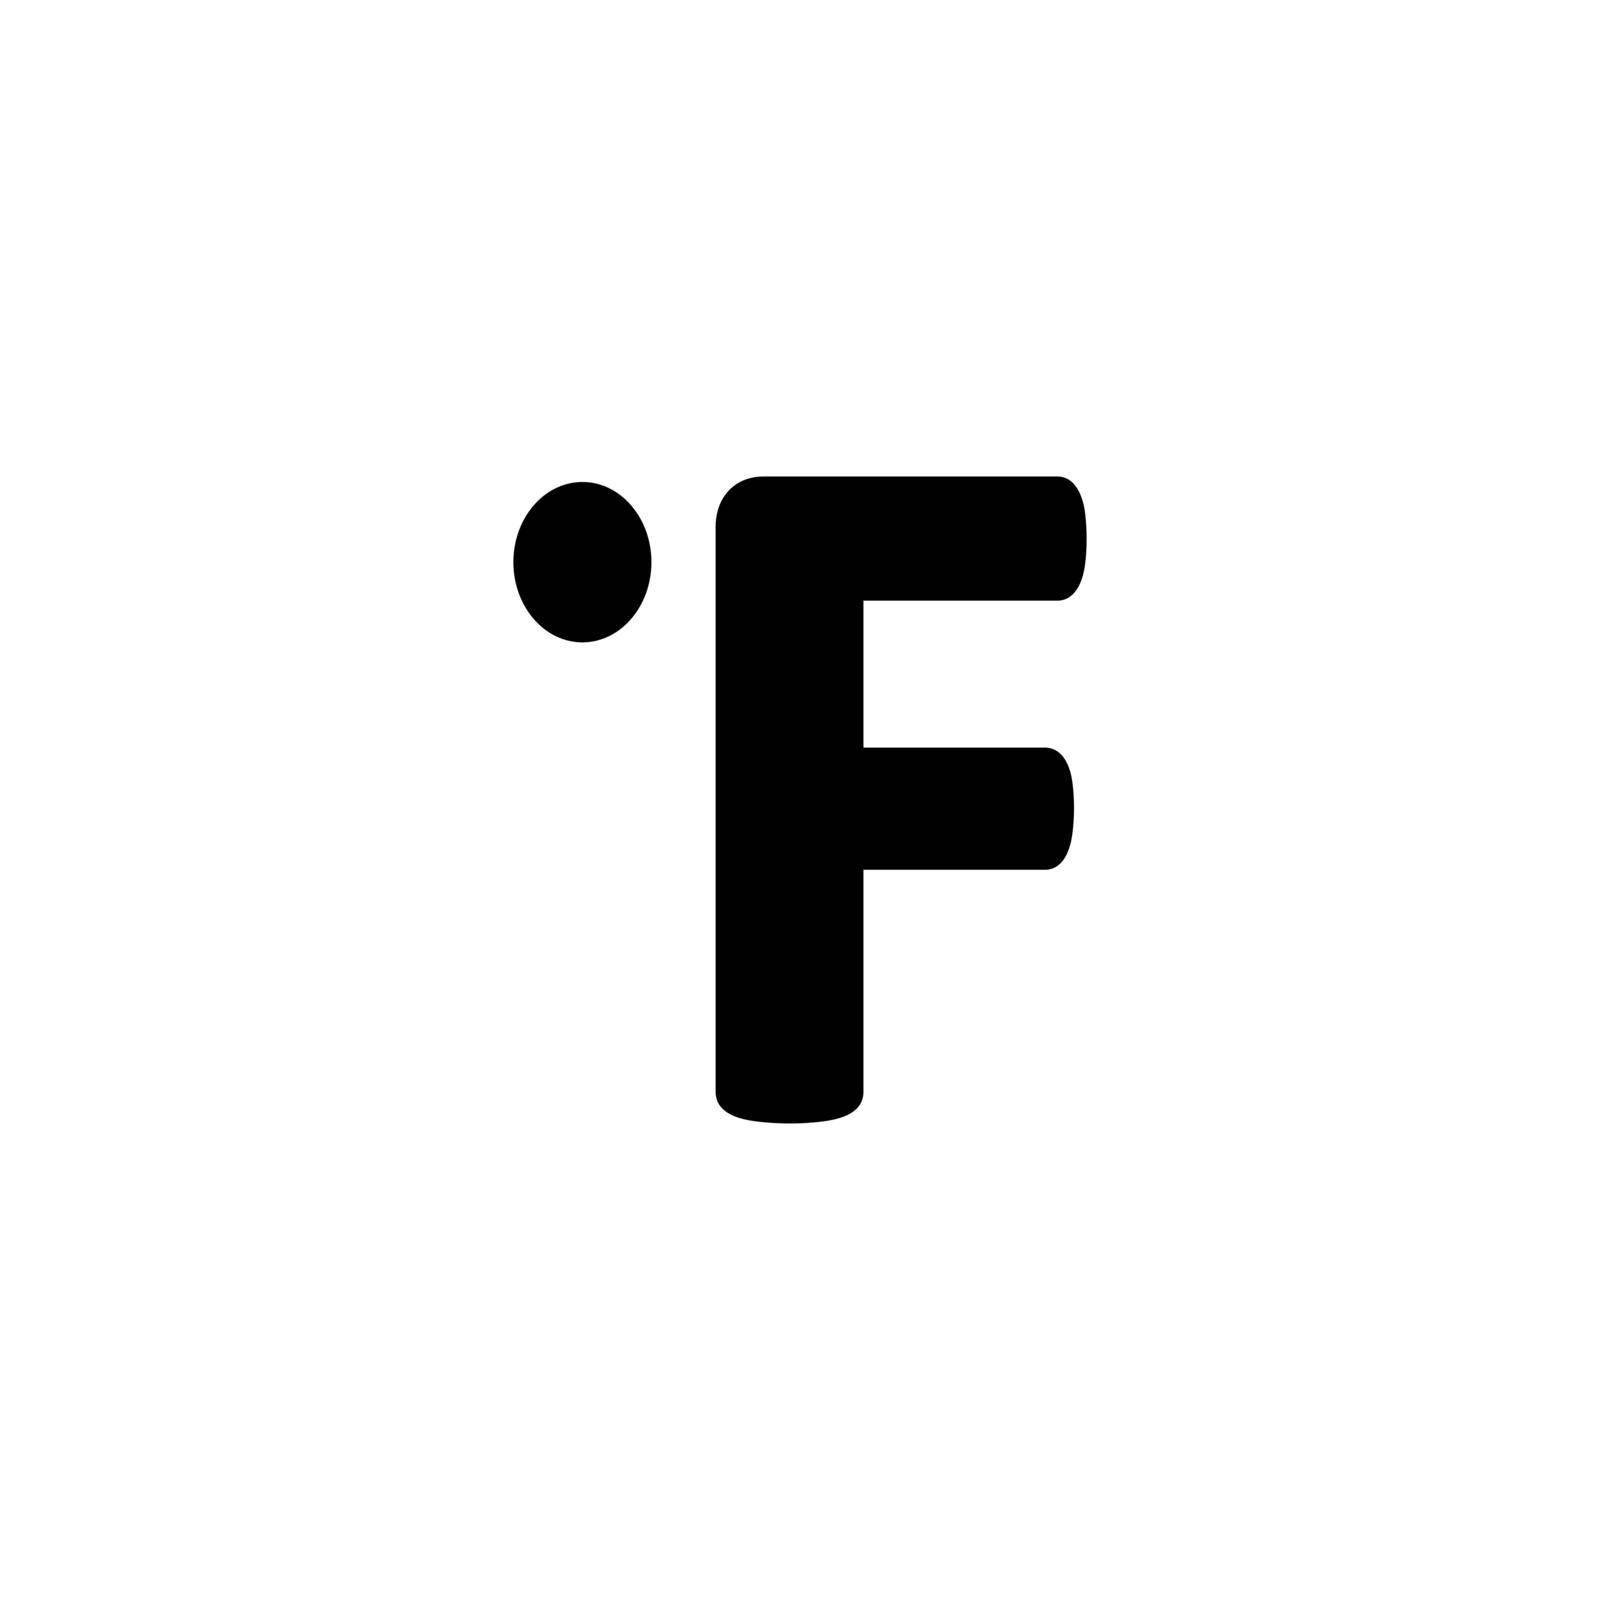 Fahrenheit degrees vector glyph icon. Weather sign by nosik